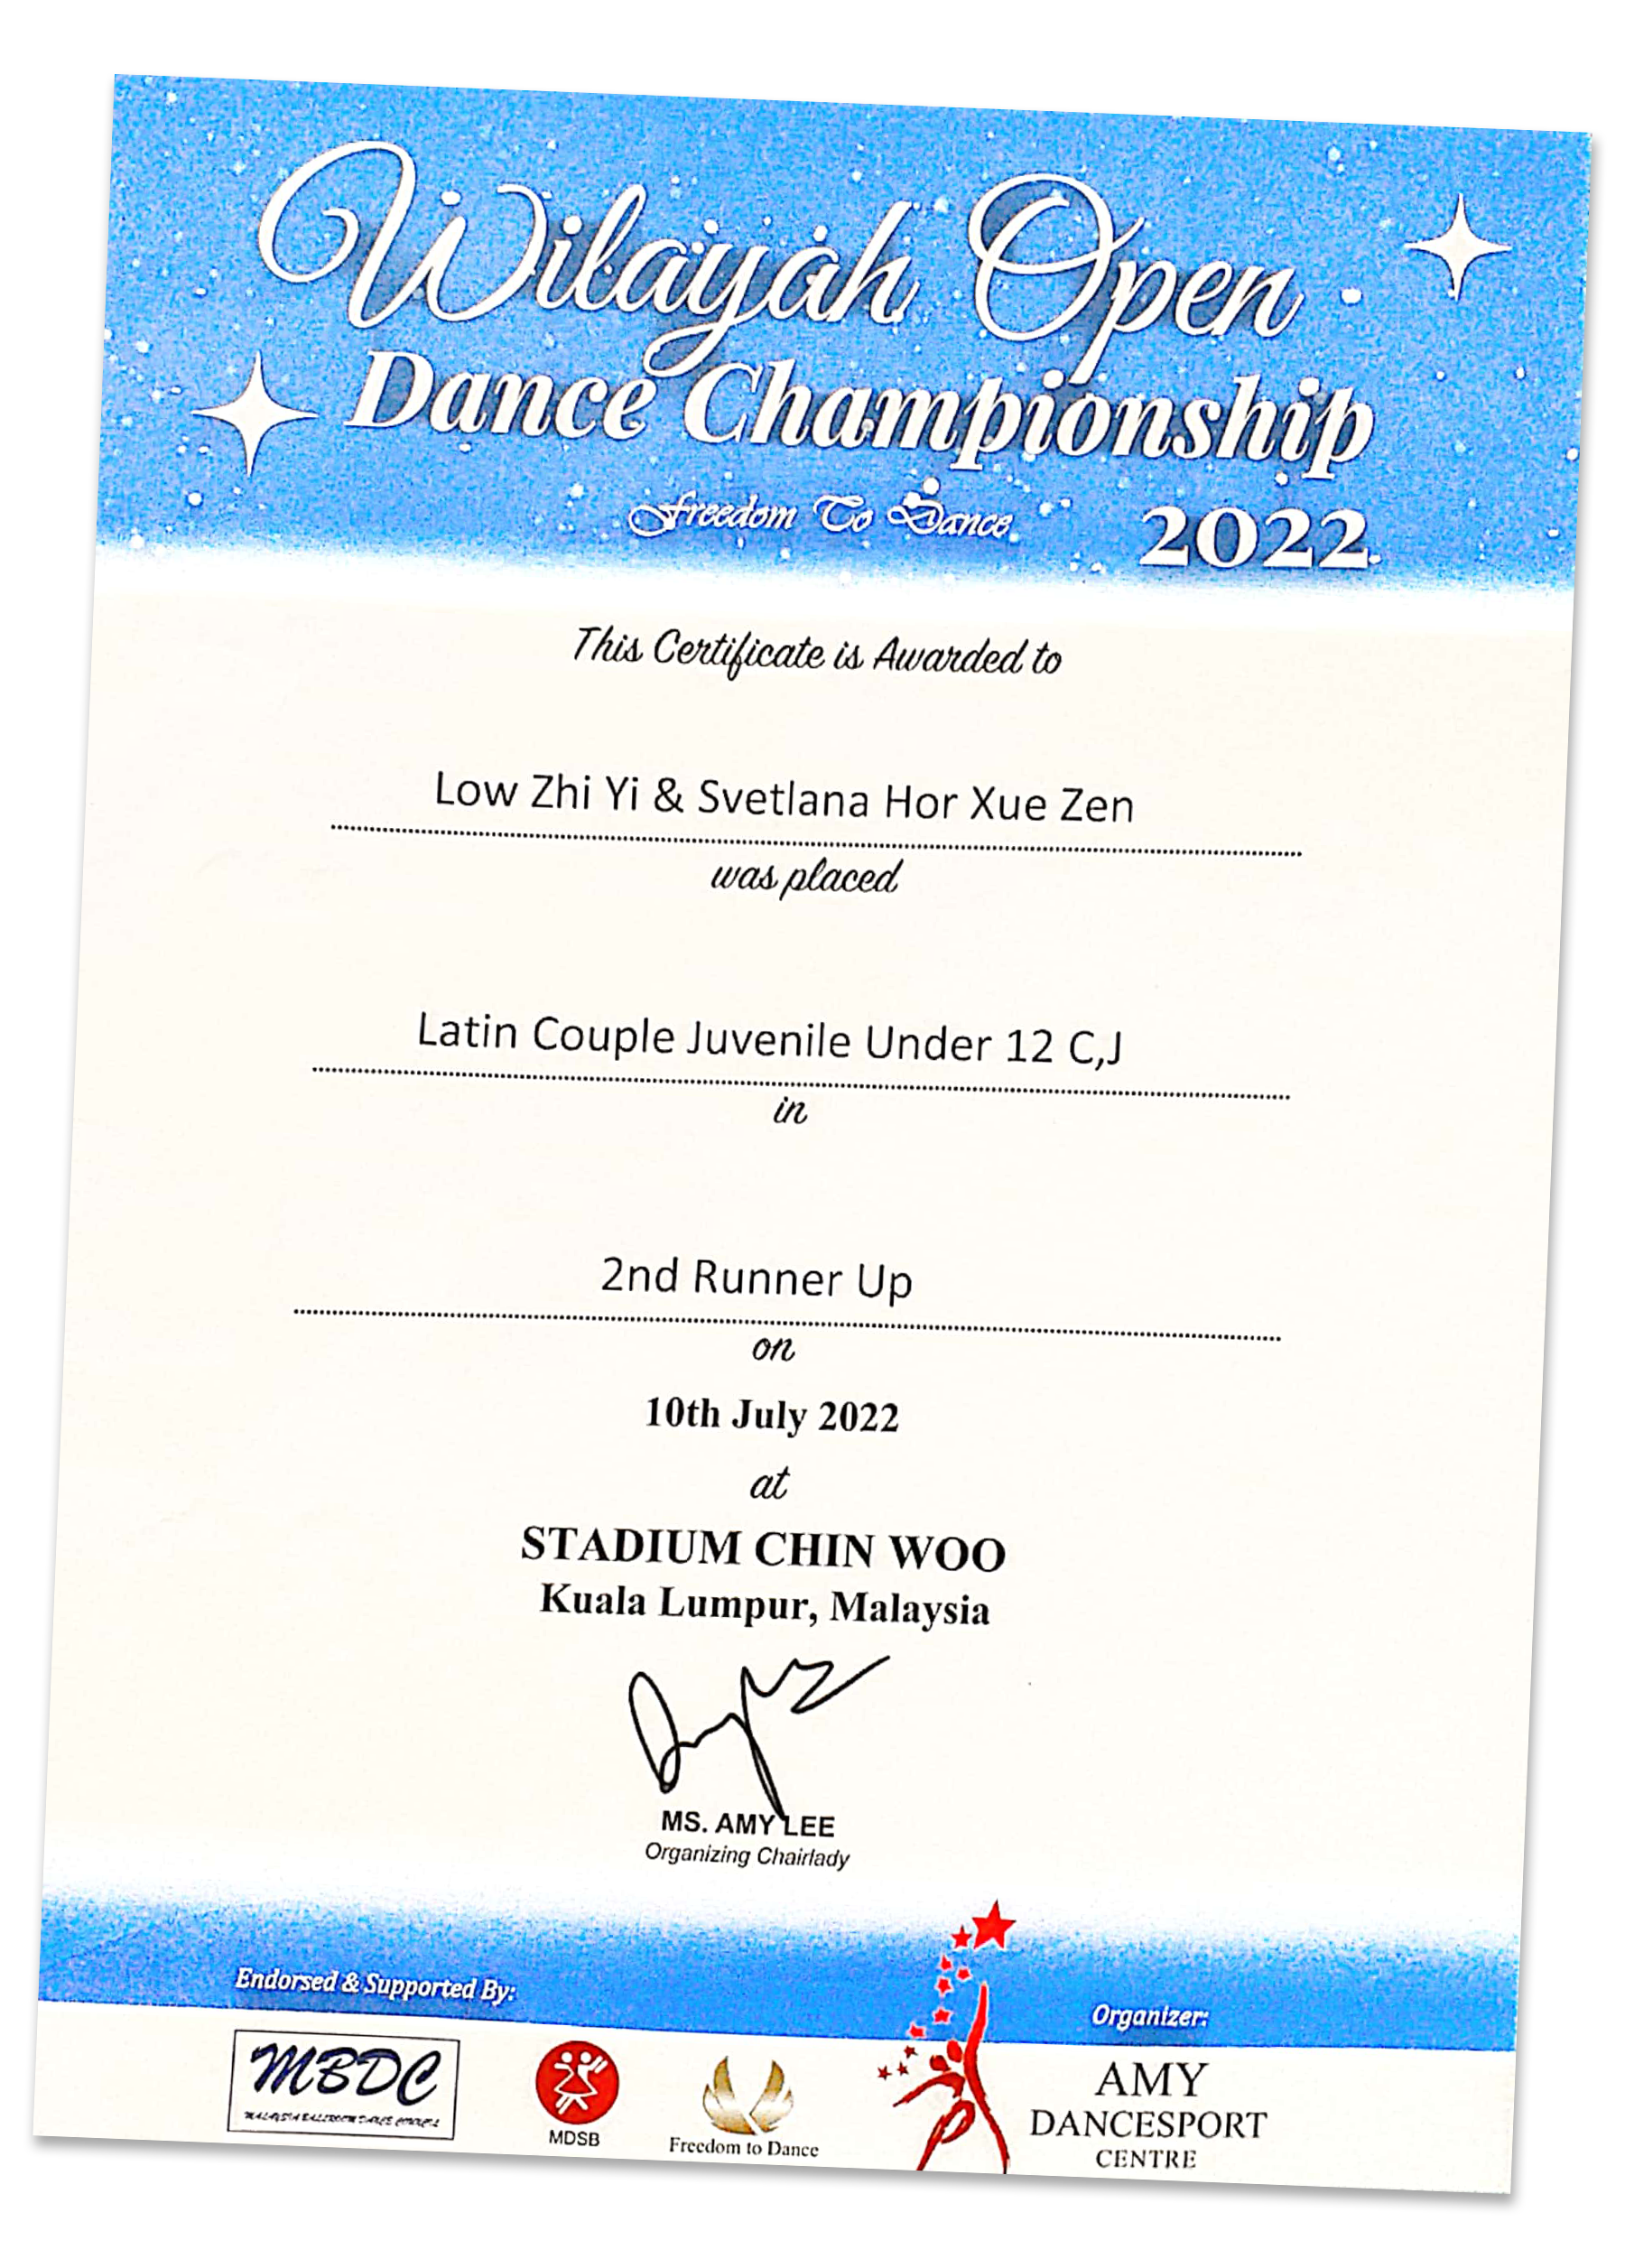 Wilayah Open Dance Championship